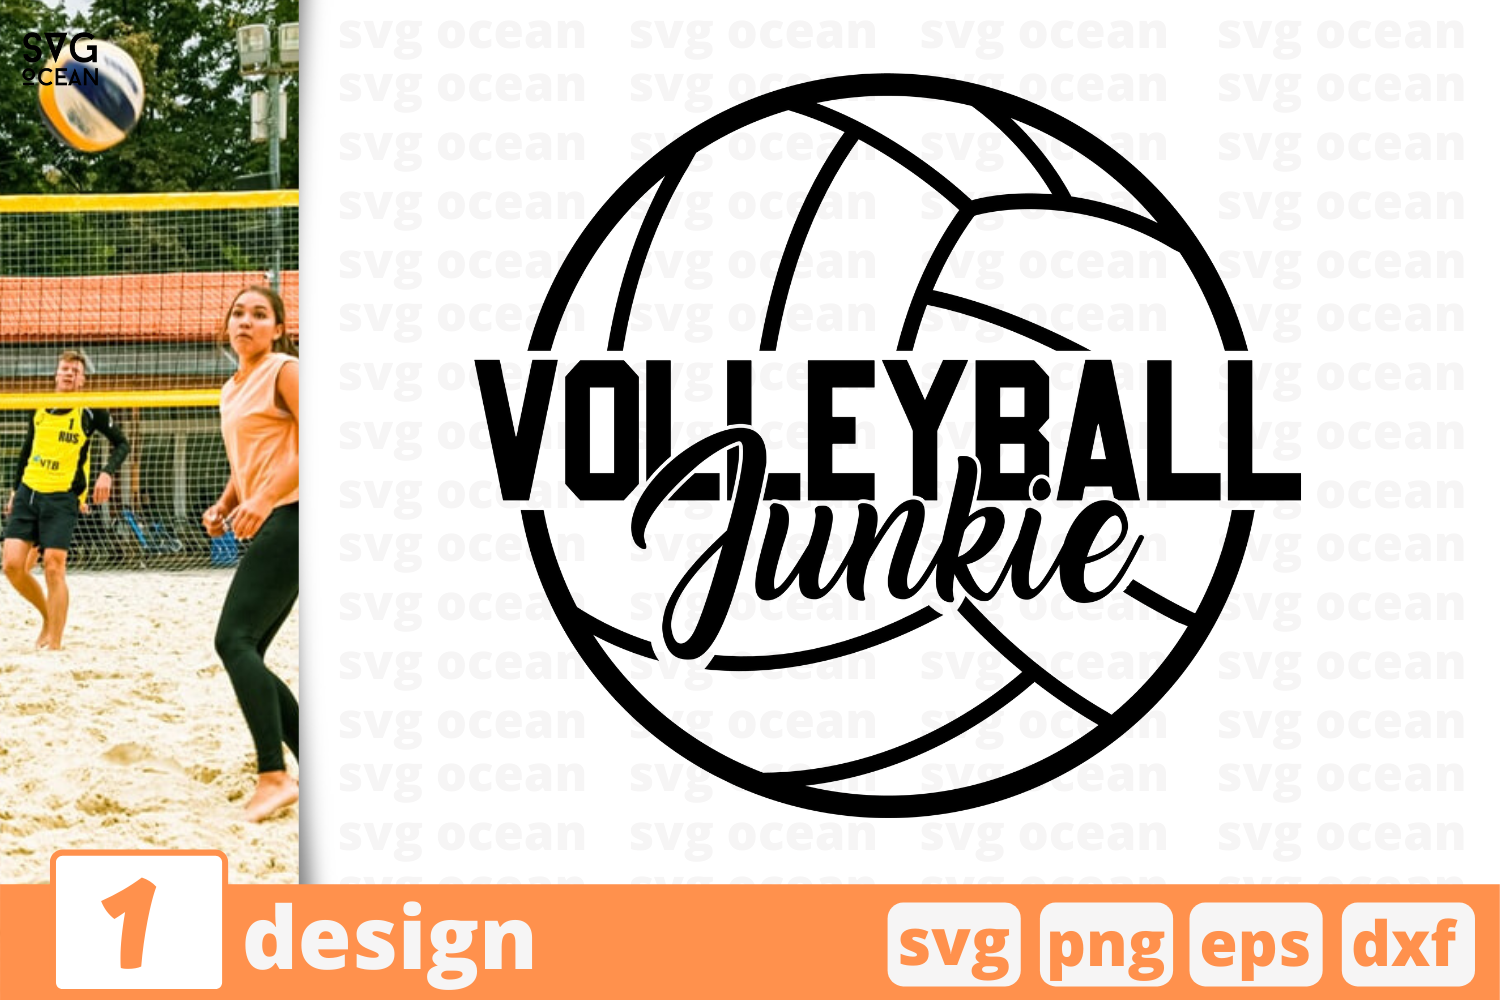 1 VOLLEYBALL JUNKIE, volleyball quote cricut svg By SvgOcean ...